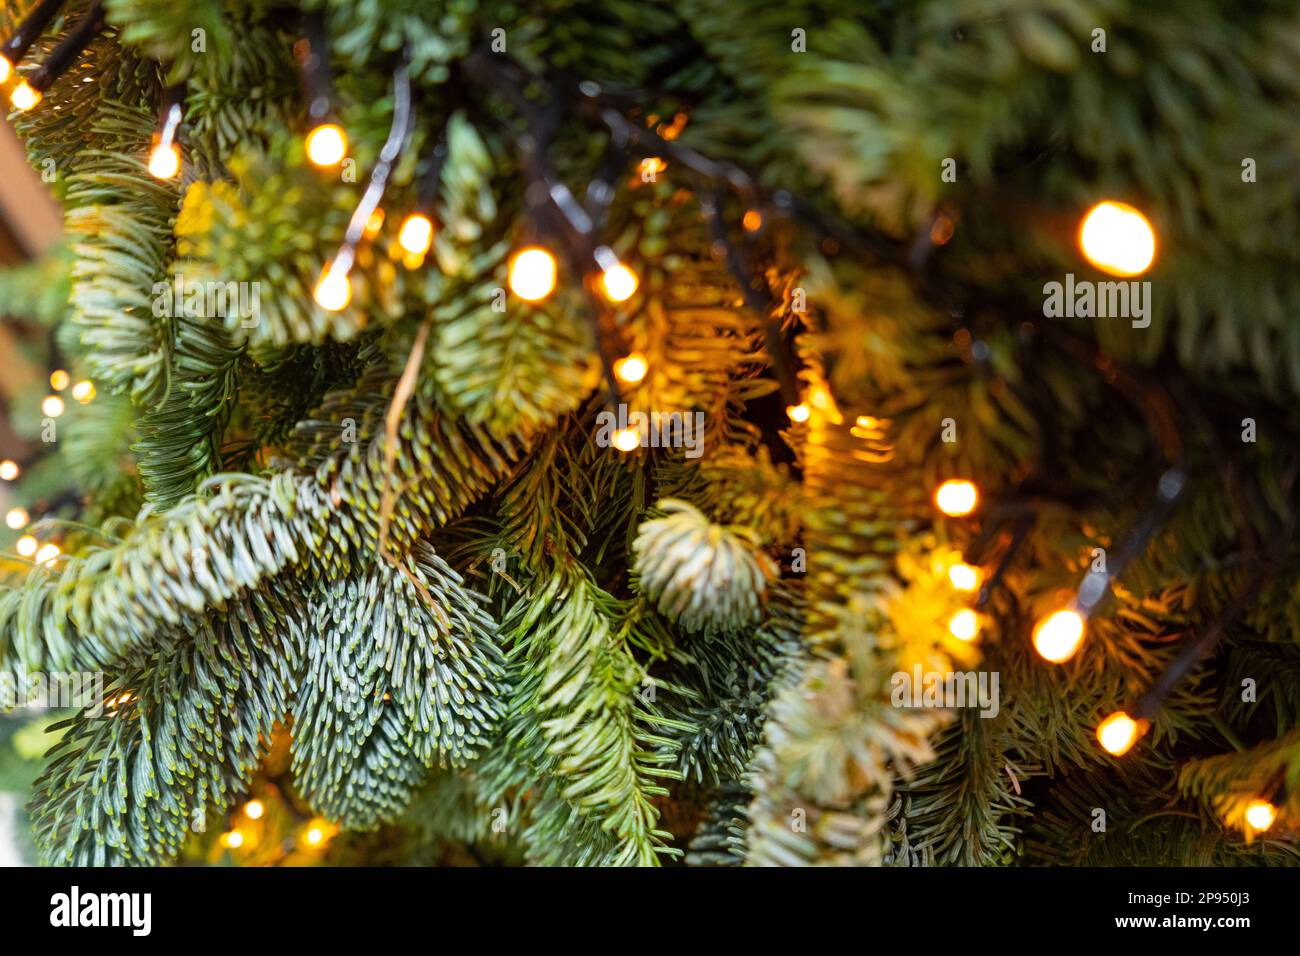 Decorated Christmas Tree, Golden Christmas Decorations, Shiny Garland on Green Branches, Blurred Xmas Background with Copy Space Stock Photo